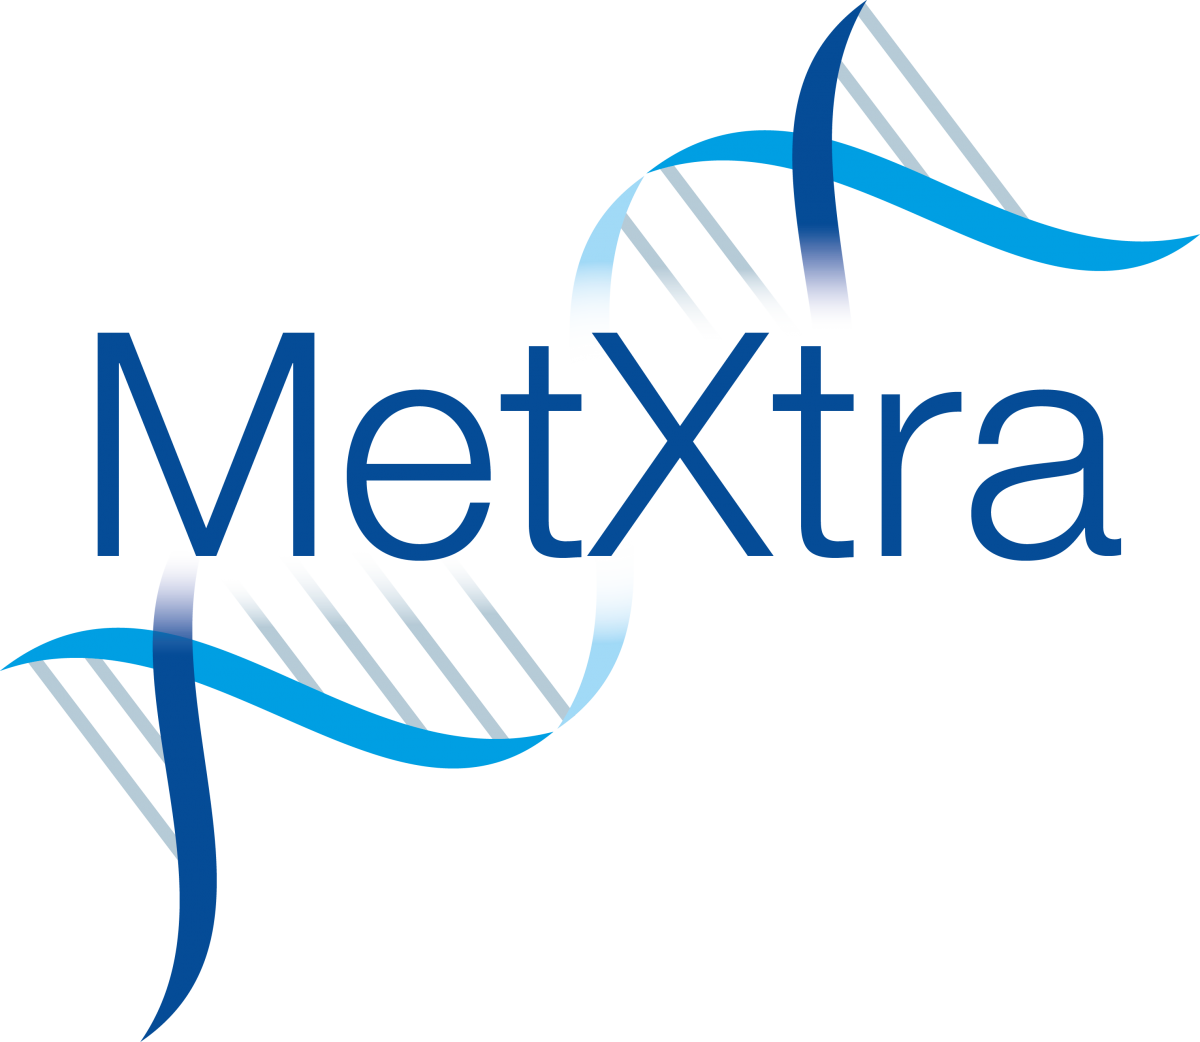 MetXtra software system enables searching and analysing very large datasets automatically